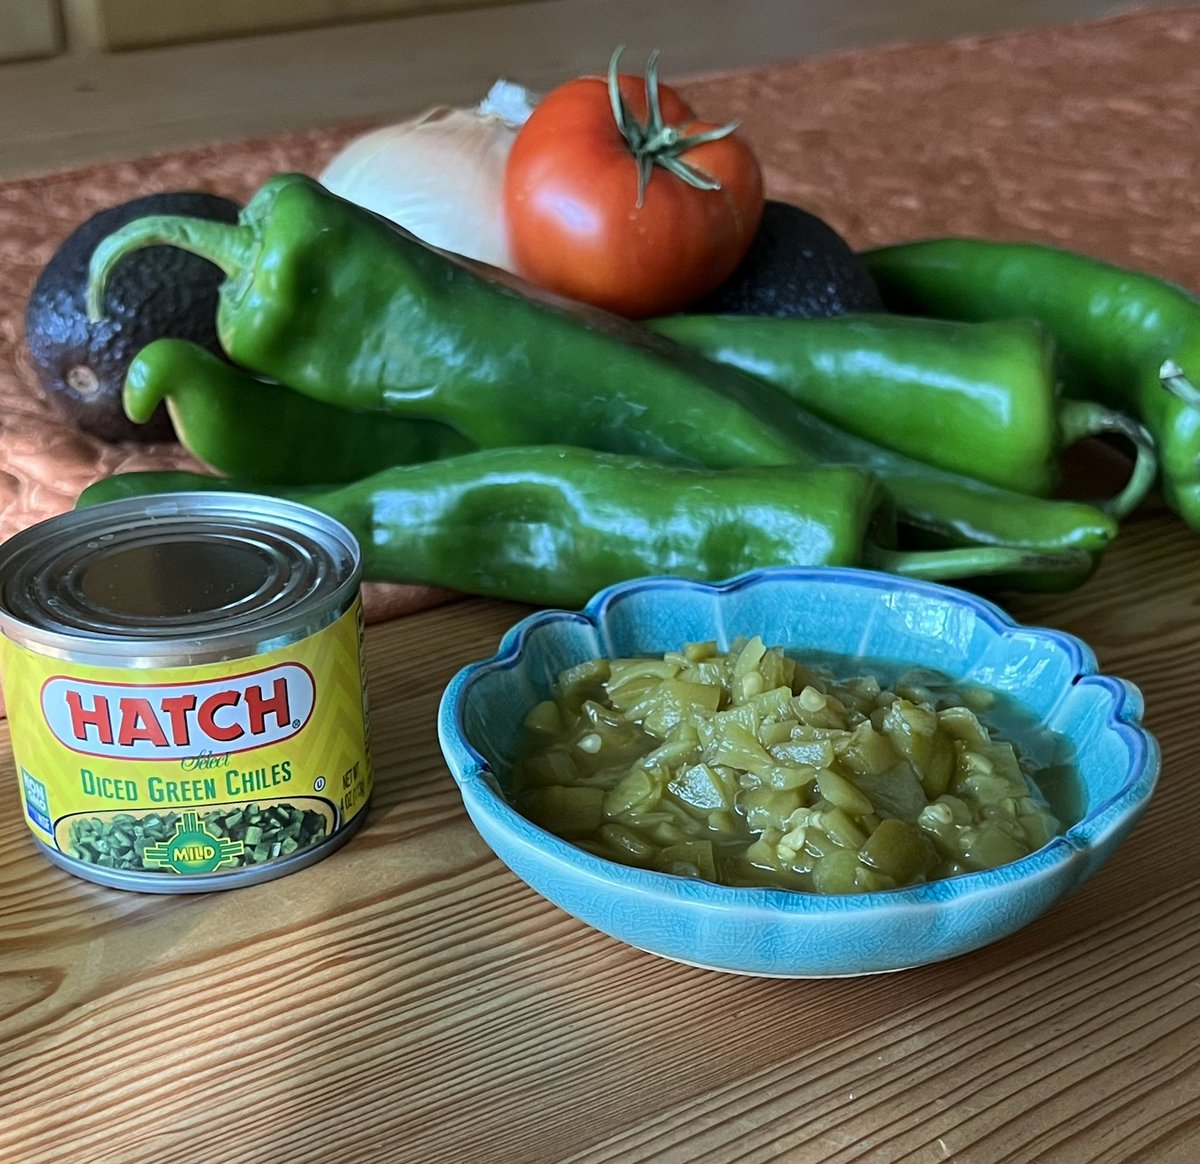 HATCH Select® green chile in HOT and MILD! 

 #NewMexico #SantaFe #Albuquerque #HatchNewMexico
#OnlyInNewMexico 
#NMTrue
#Whole30Certified #Keto #GlutenFree #PartyIdeas #Sprouts #Albertsons #WalMart #Amazon